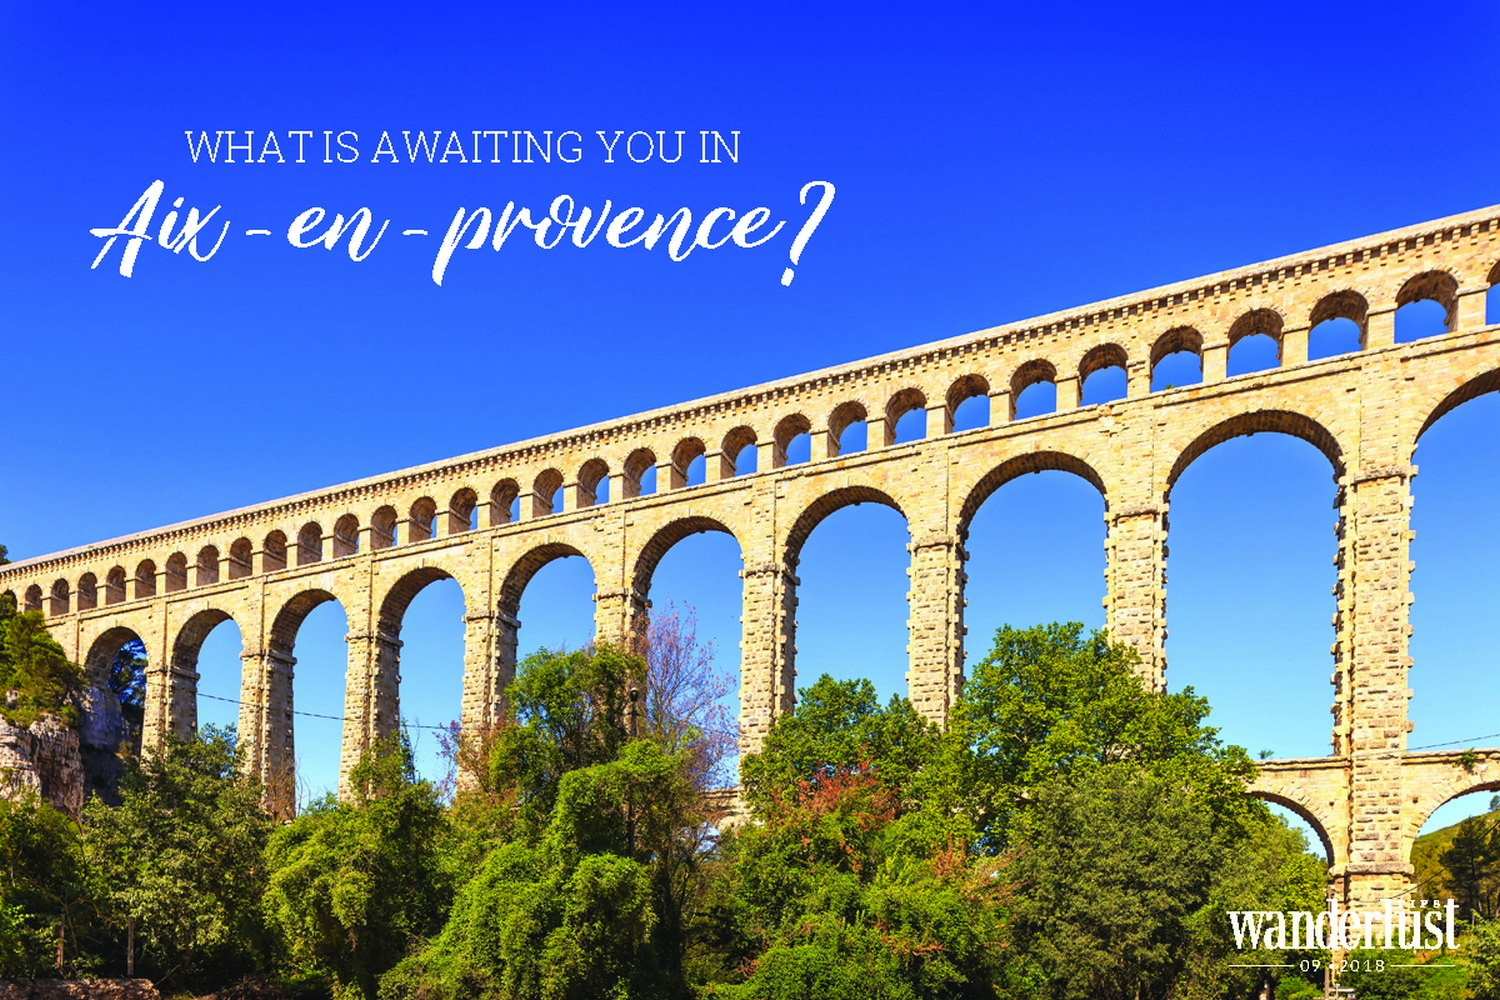 Wanderlust Tips Magazine | What is awaiting you in Aix-en-provence?